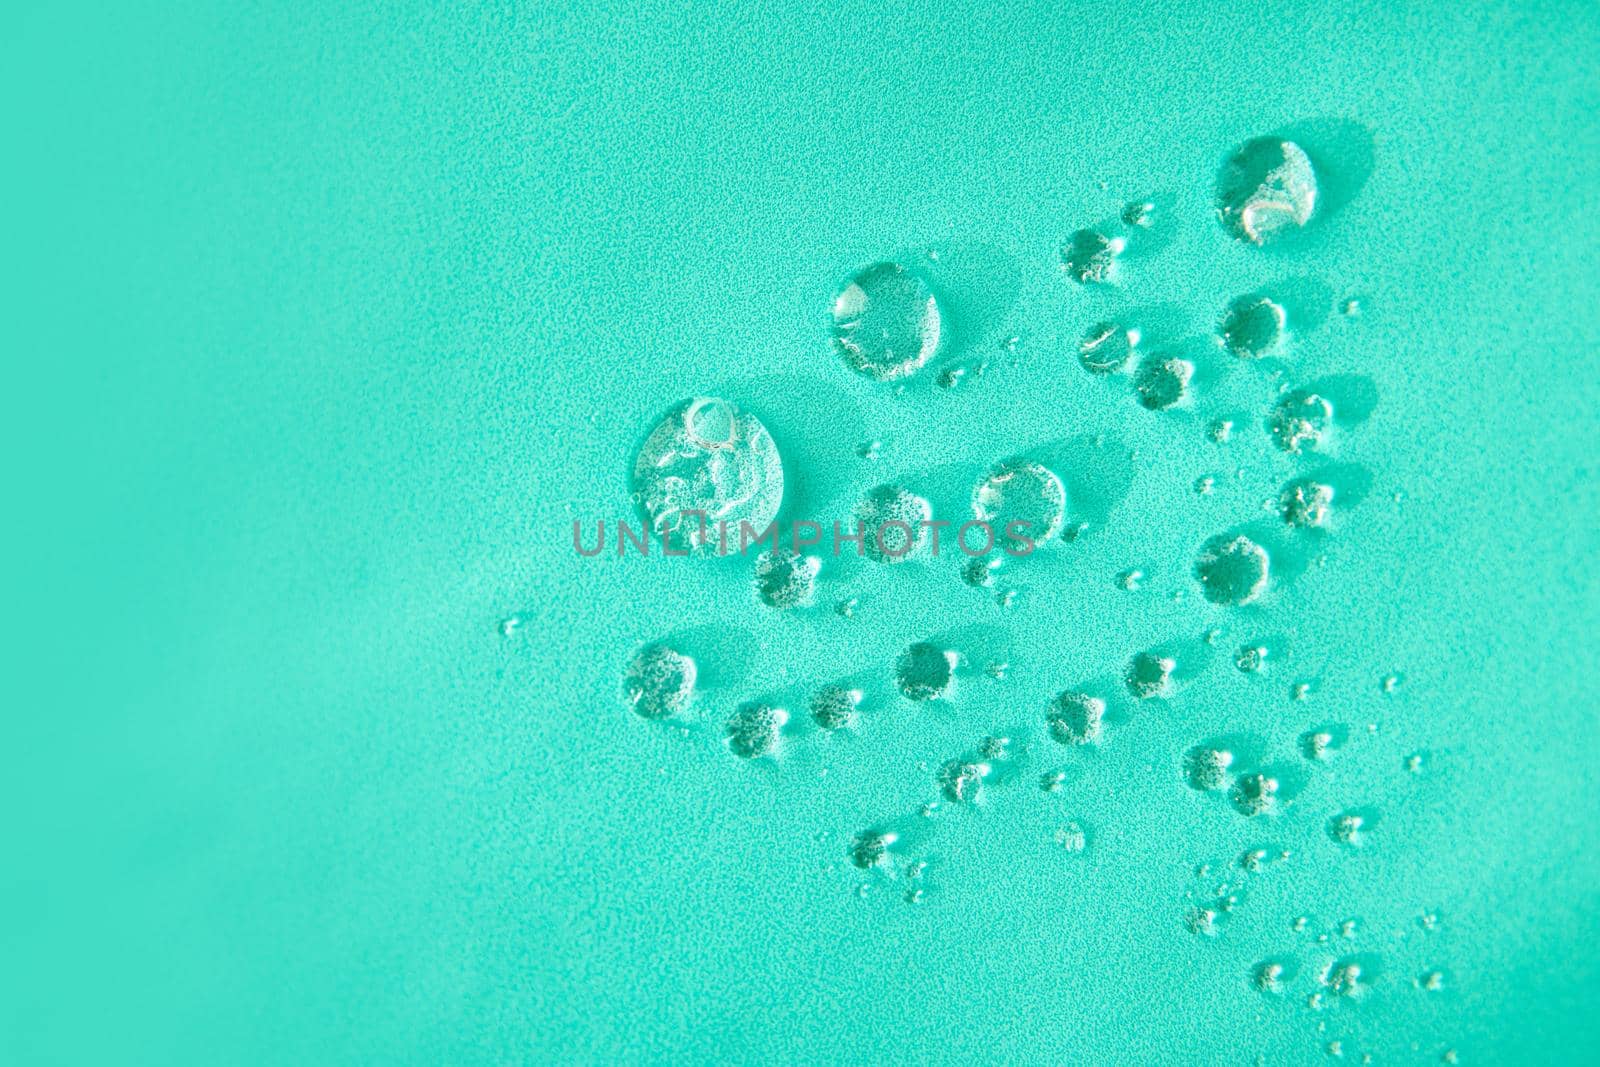 Colorful background with small waterdrops turquoise aqua by Demkat